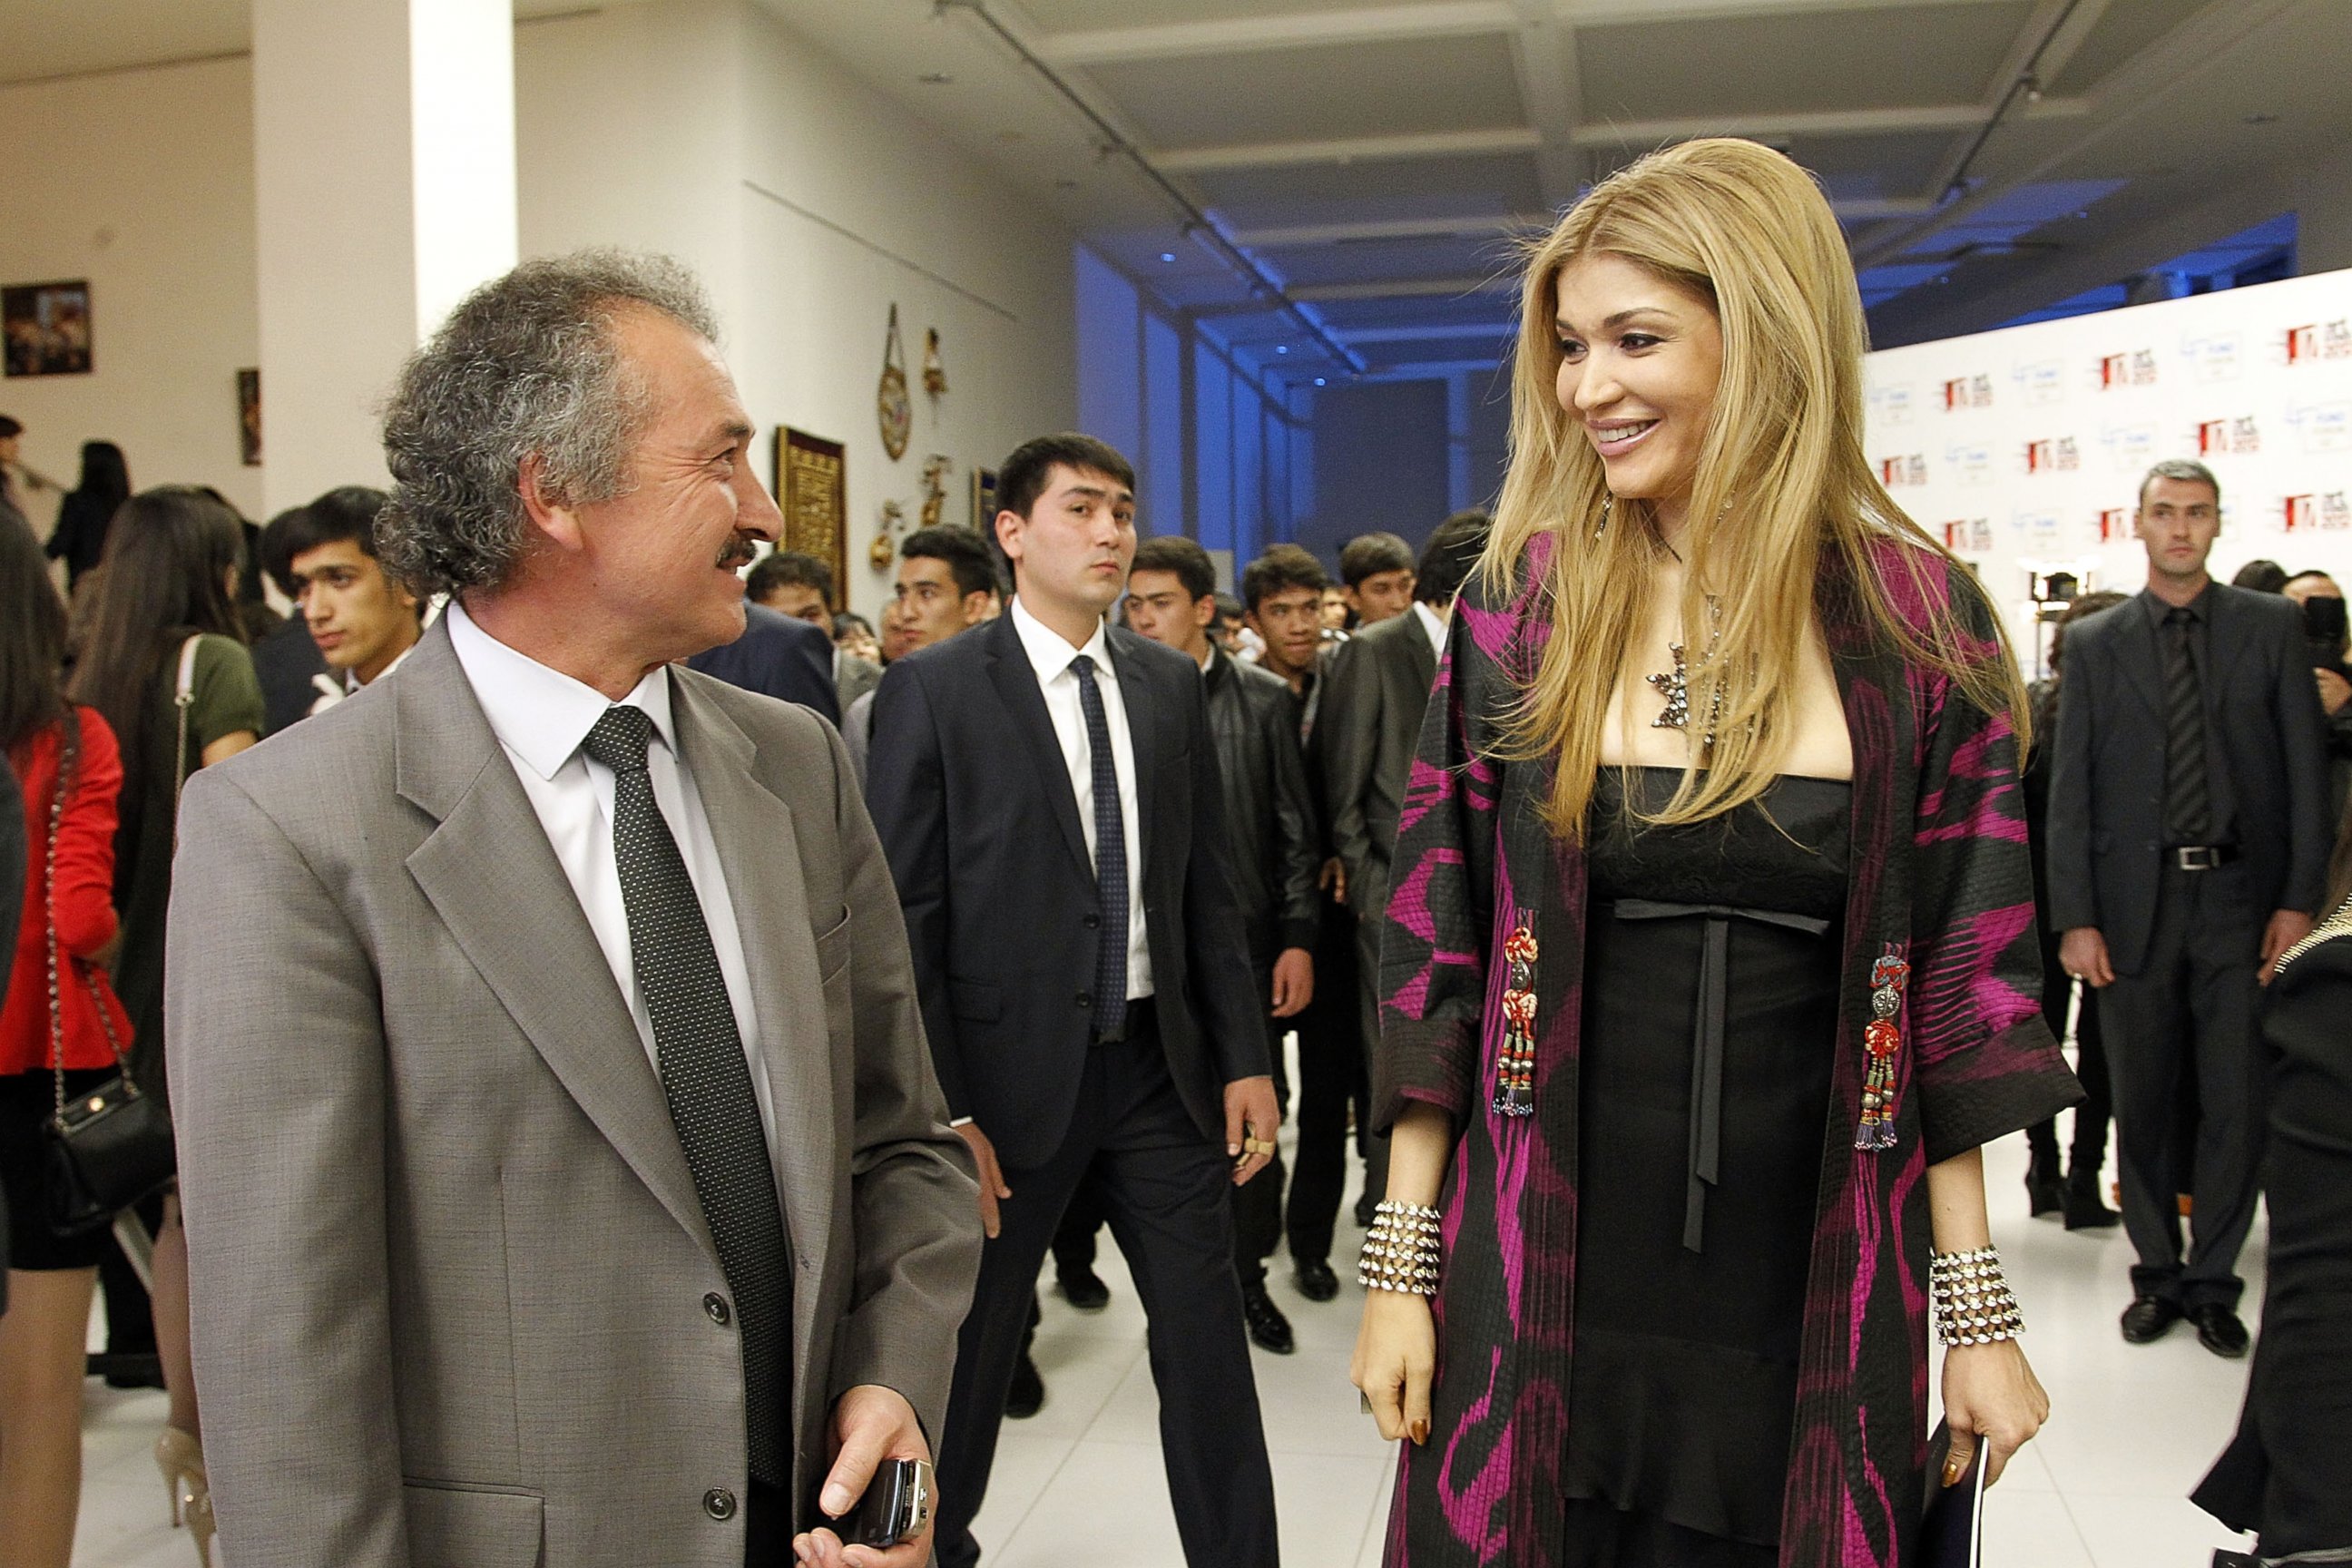 PHOTO: Painter Akmal Nur and Gulnara Karimova, Chairwoman of the Fund Forum Board of Trustees visit the exhibition during the Style.Uz Art Week 2012 opening ceremony on at The Youth Art Palace on Oct. 4, 2012 in Tashkent, Uzbekistan.  